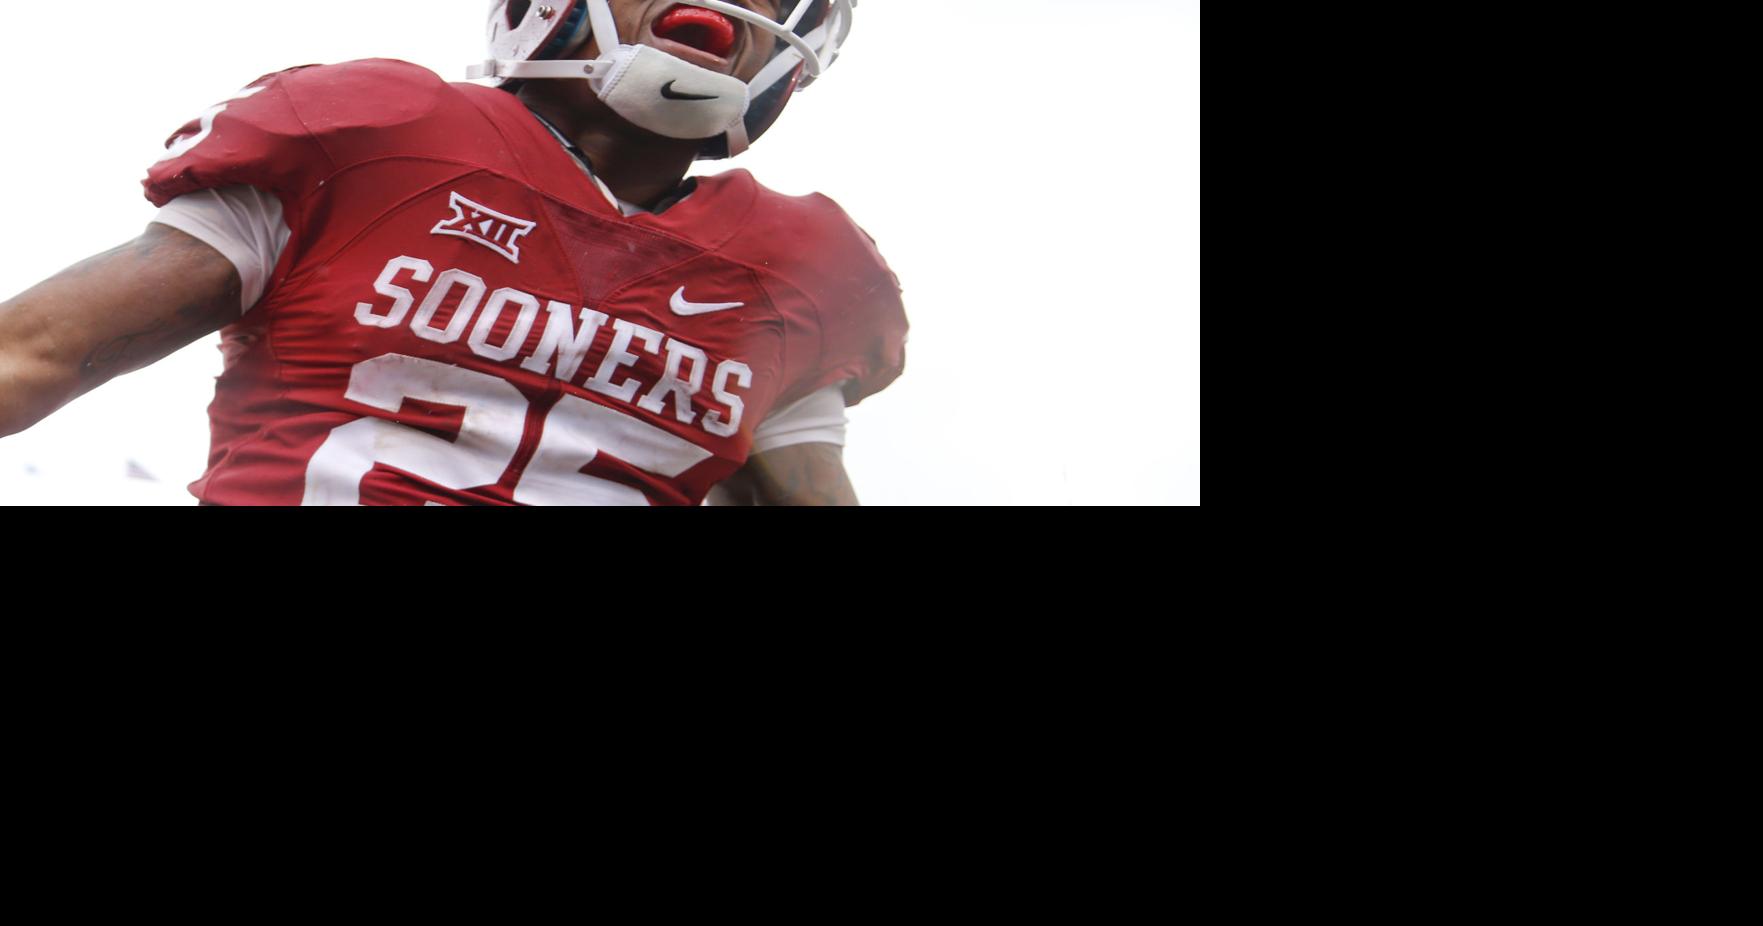 It's not time to press the panic button about Joe Mixon yet